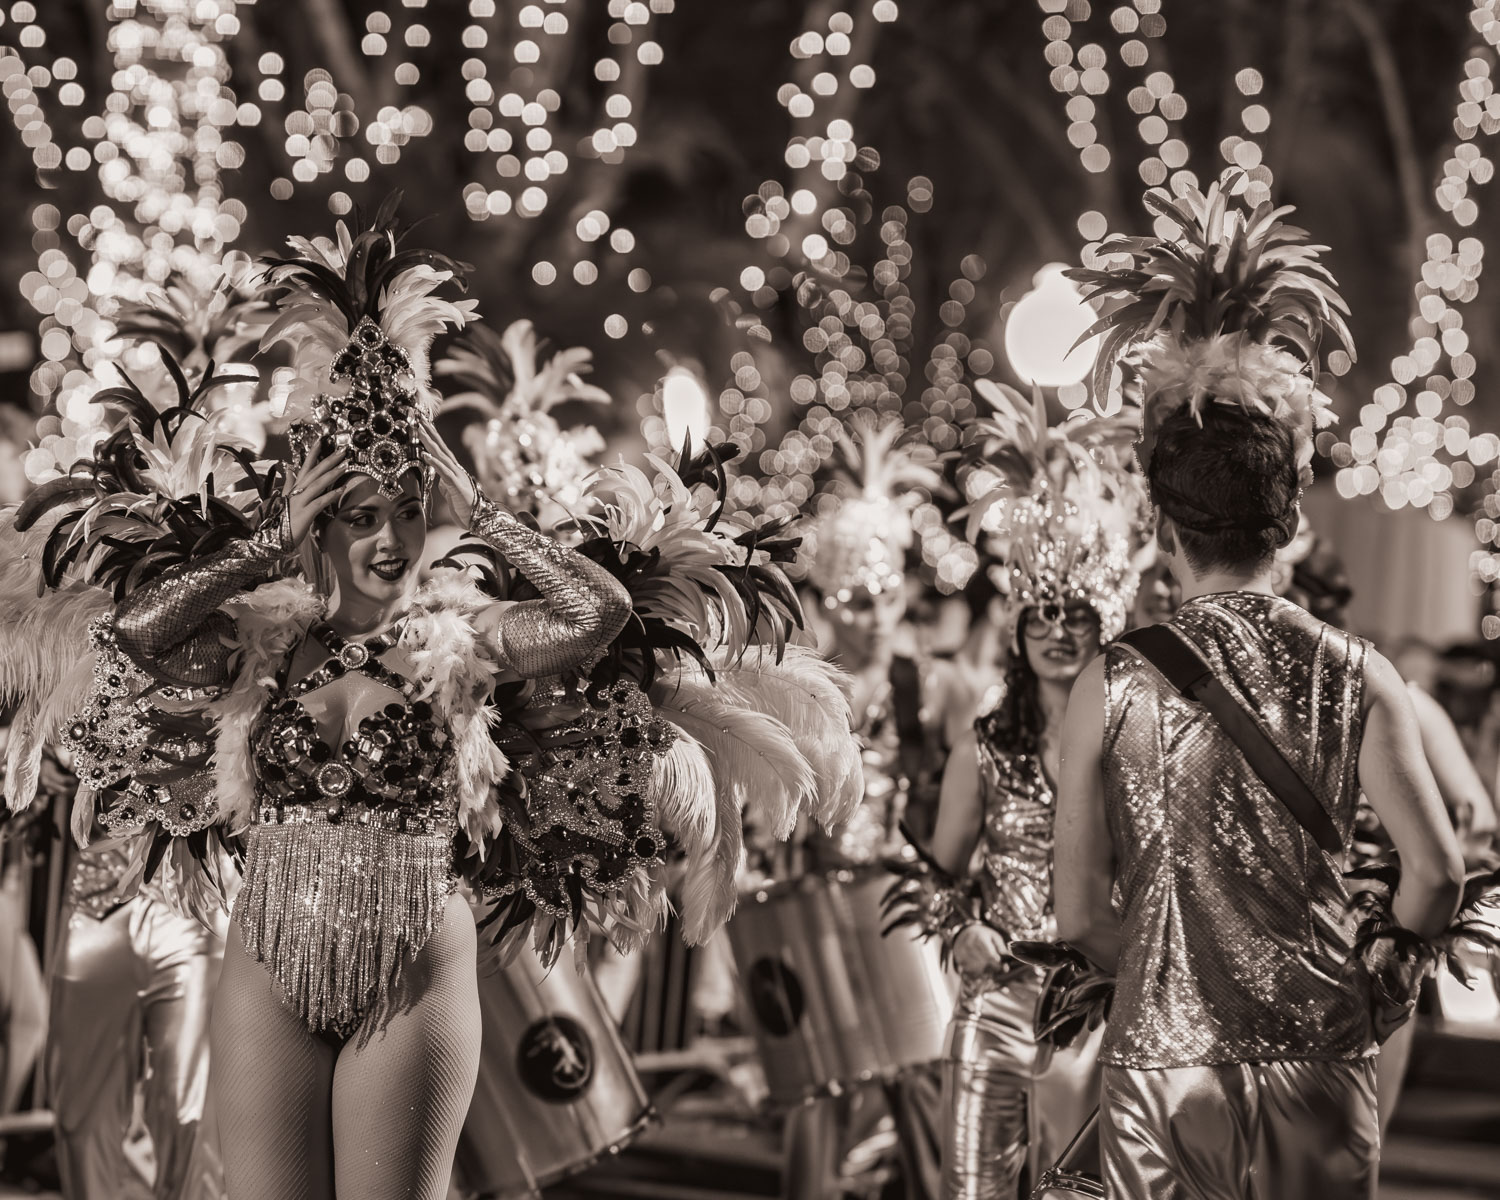 The Carnival of Life - Carnival Parade in Madeira